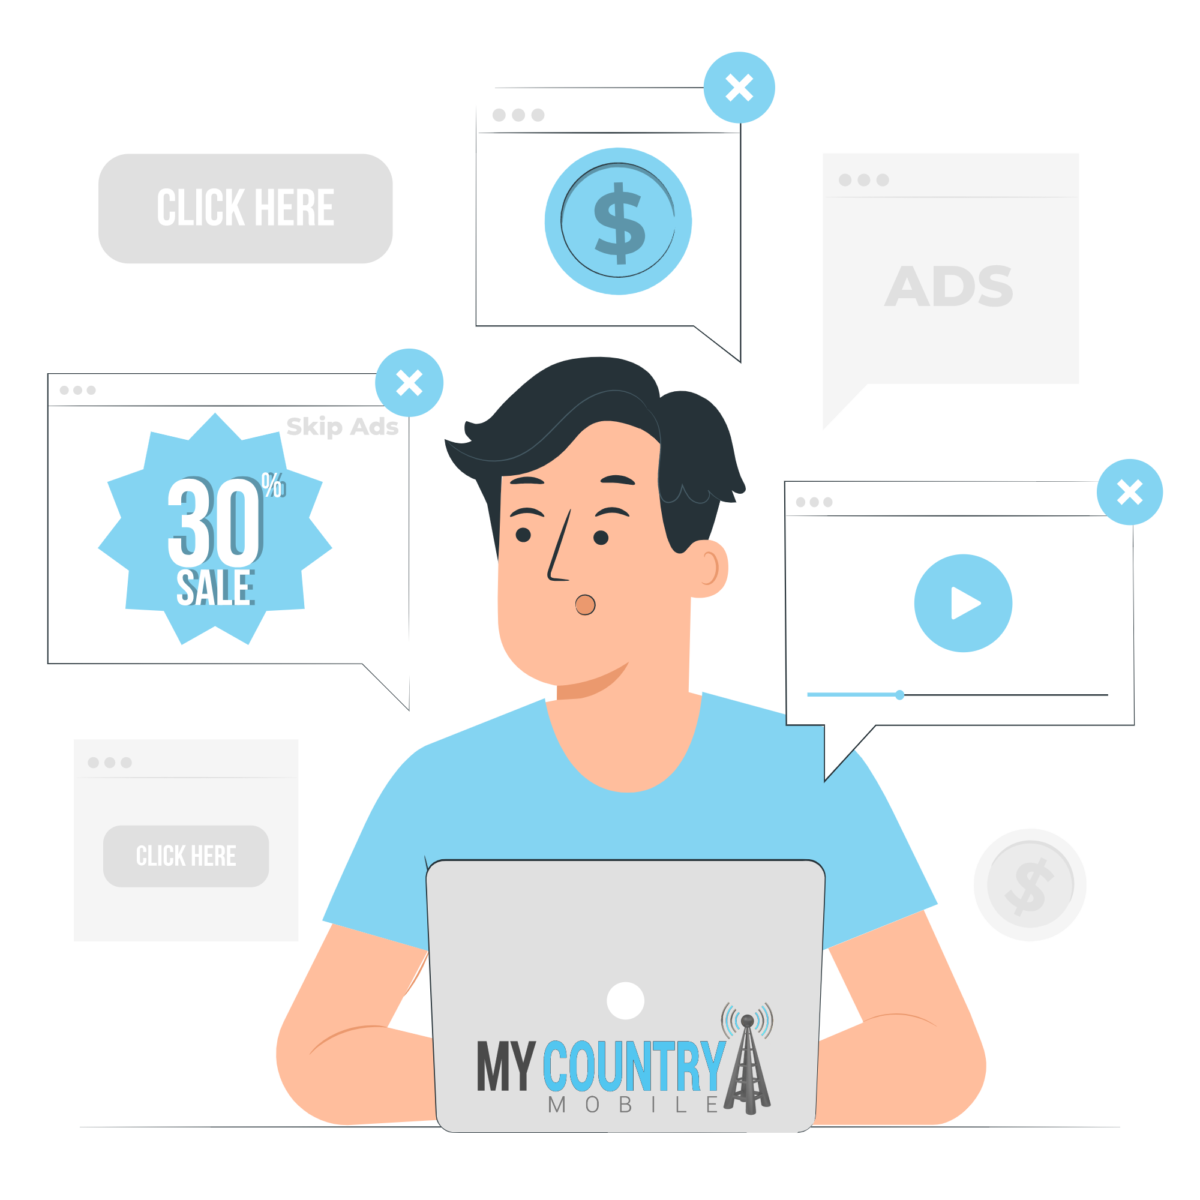 Why choose when there are so many companies - MYCOUNTRY MOBILE